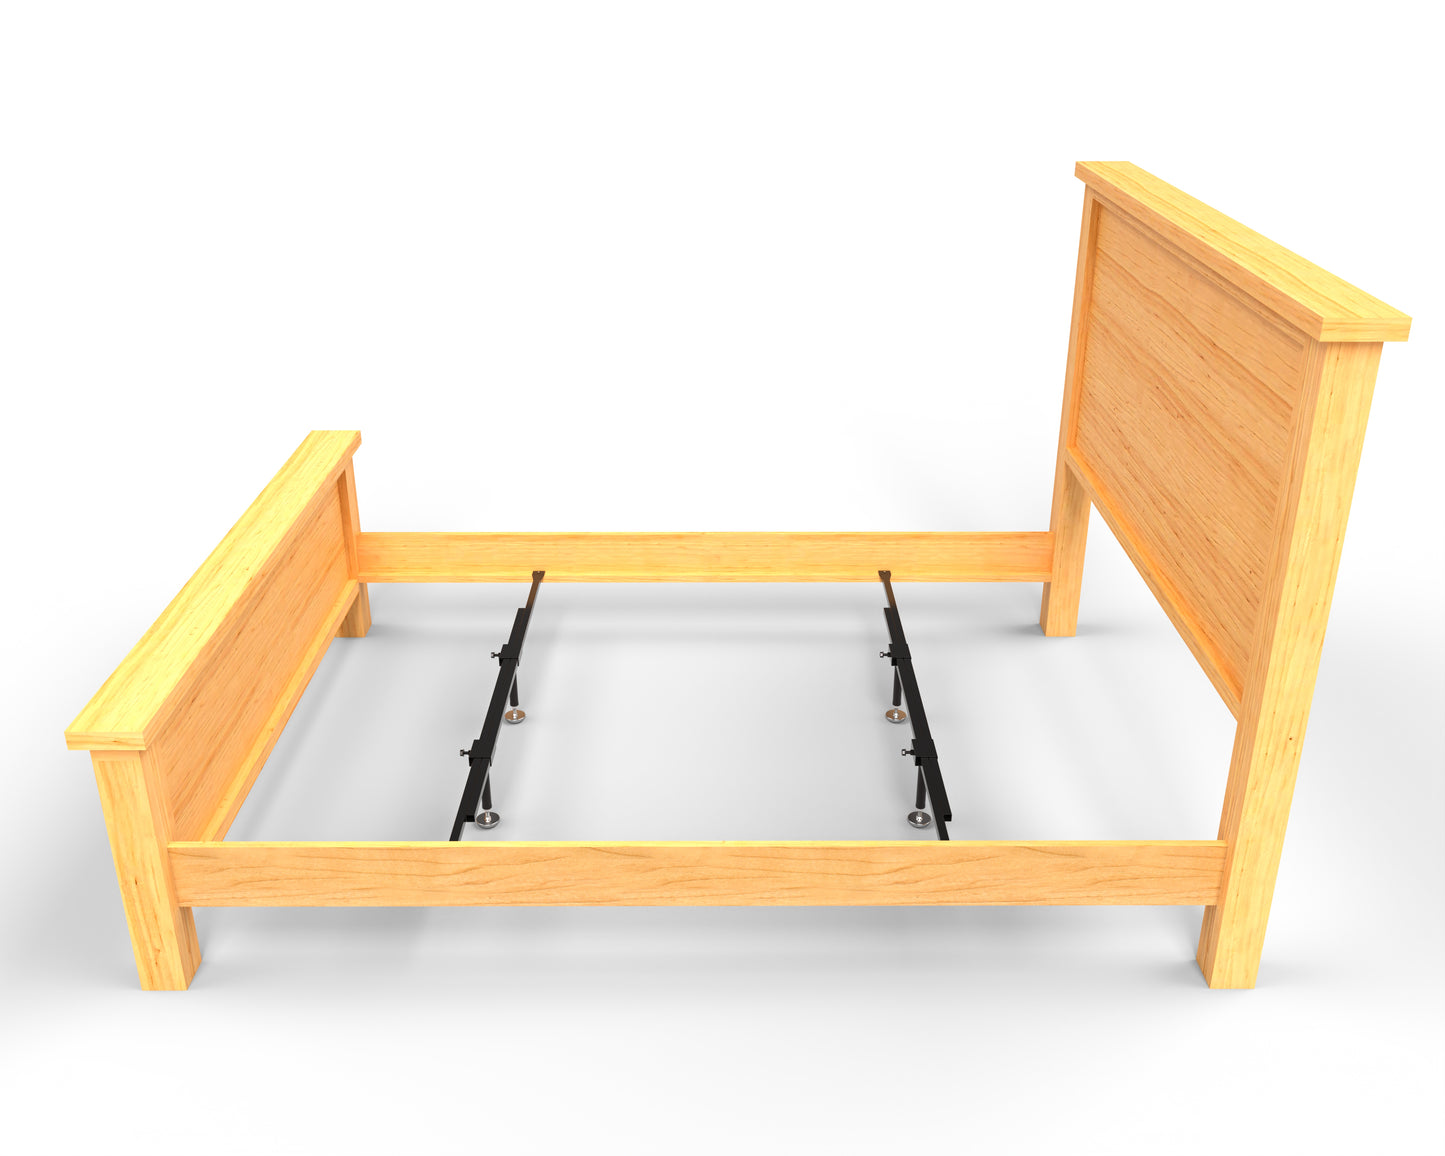 Universal Bed Supports